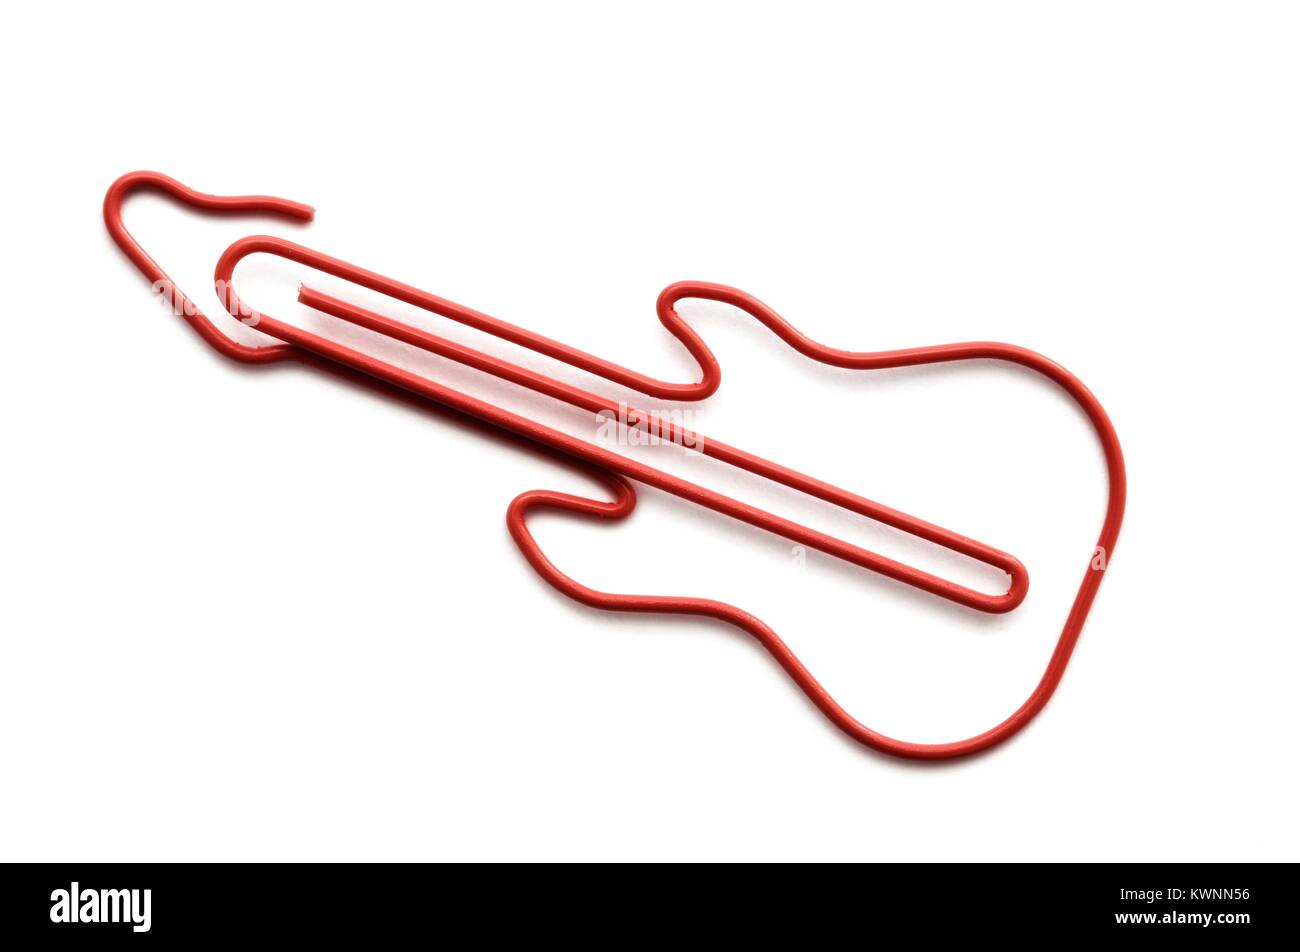 guitar shaped novelty paper clip Stock Photo